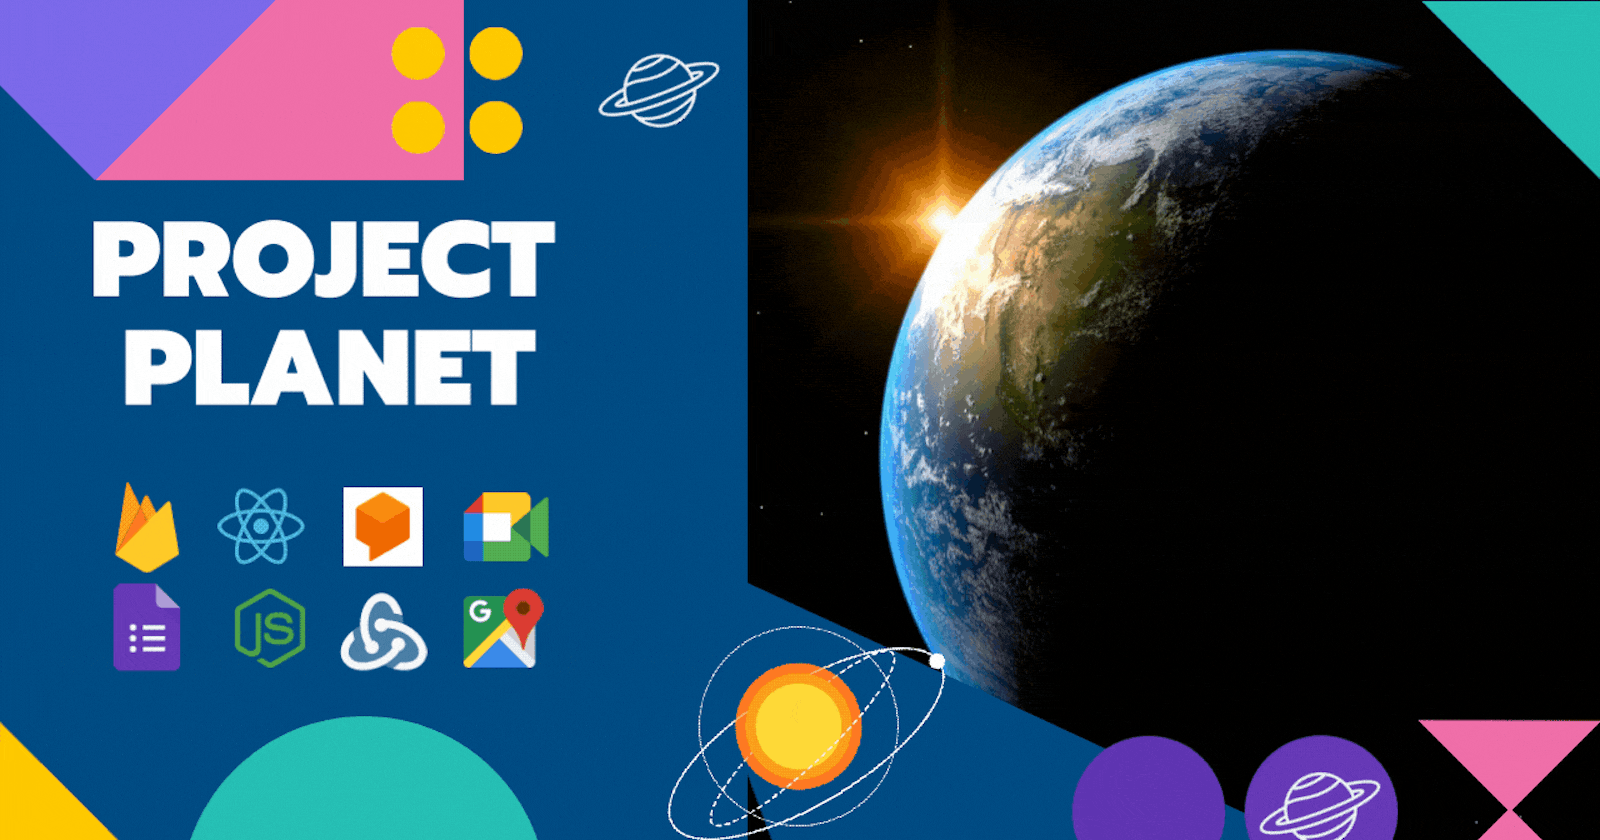 Project Planet: An initiative to make the earth a better place for living.